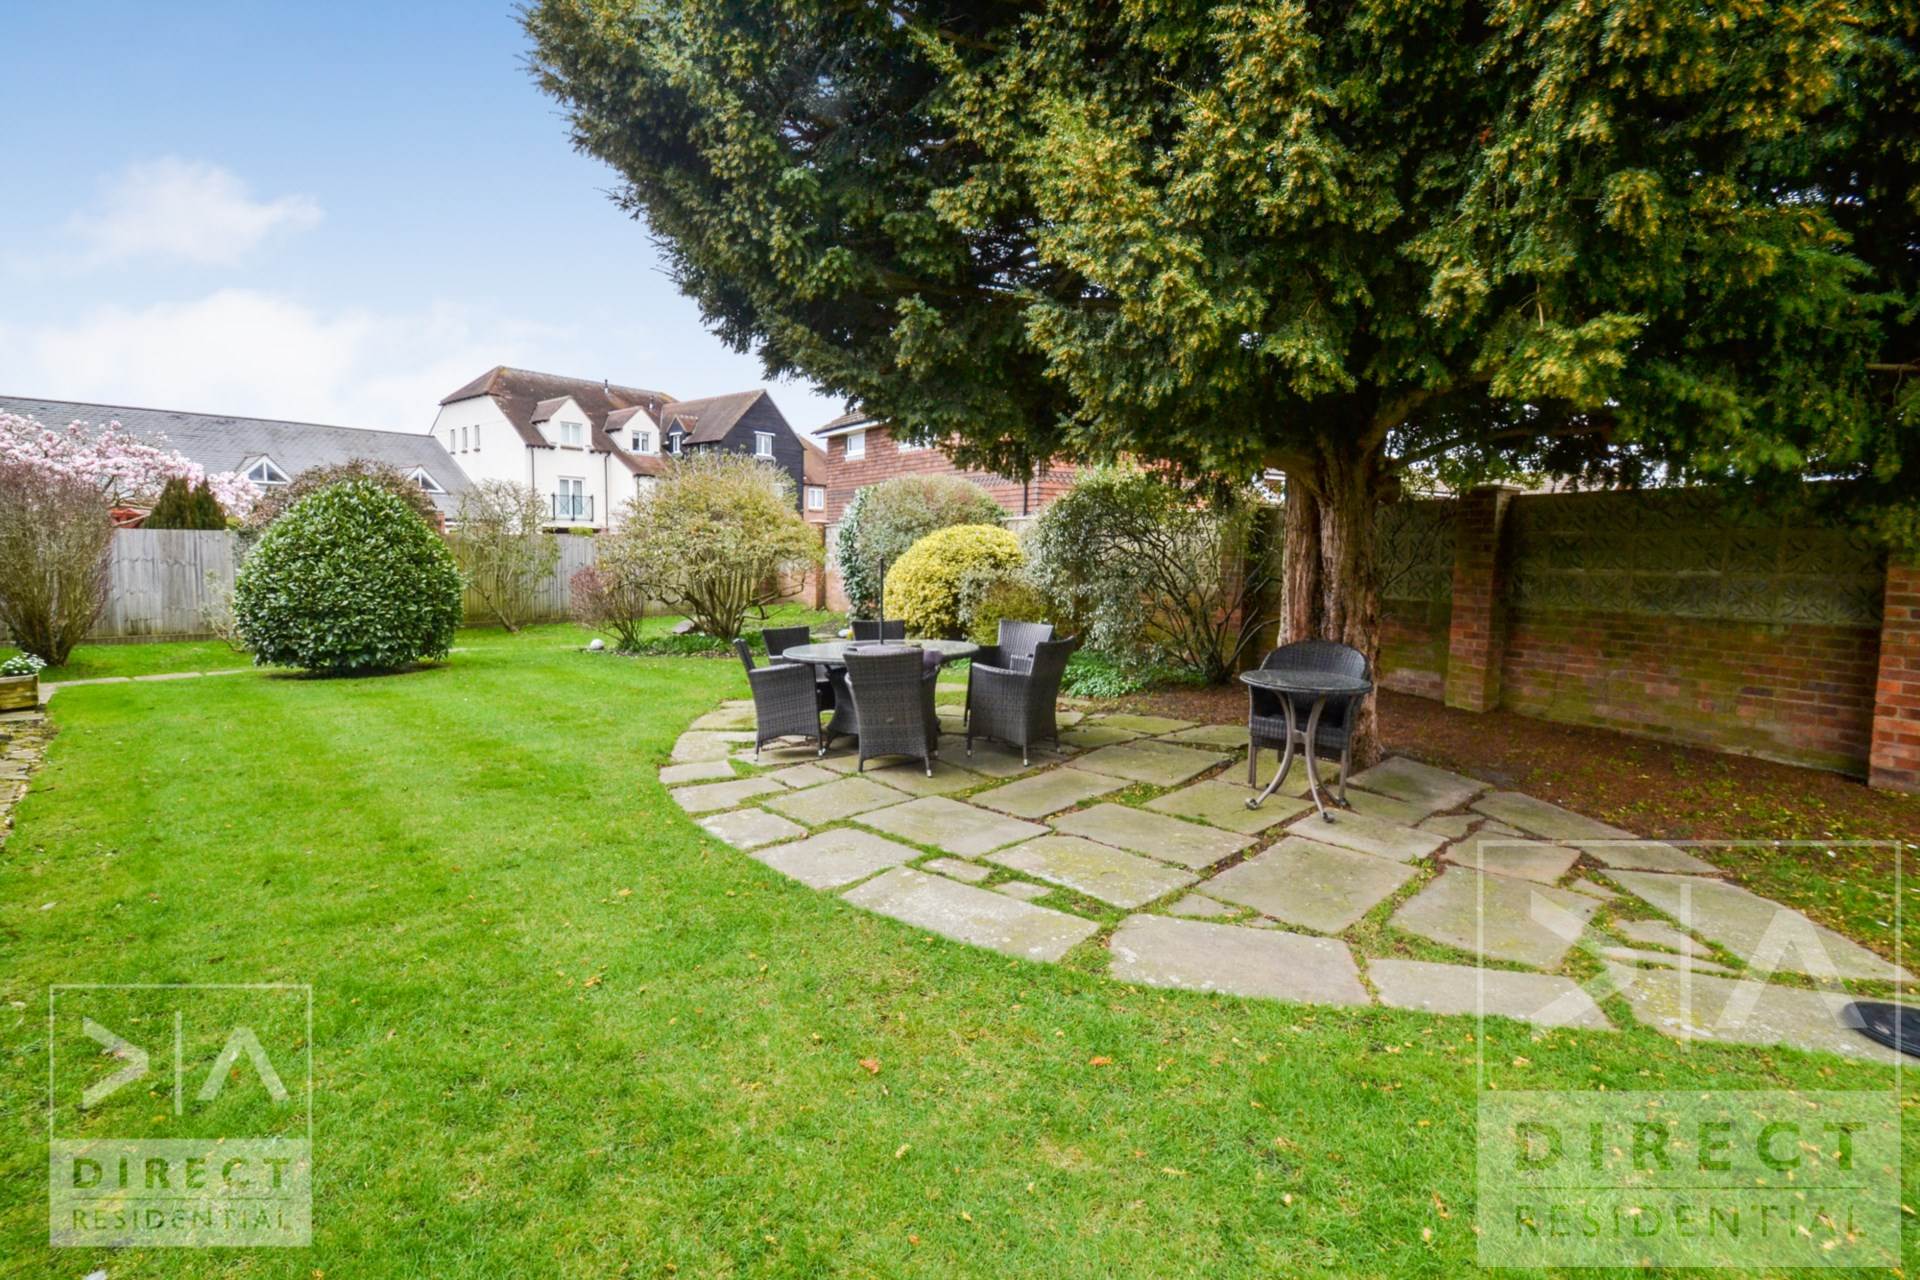 Quennell Close, Ashtead, KT21 2AW